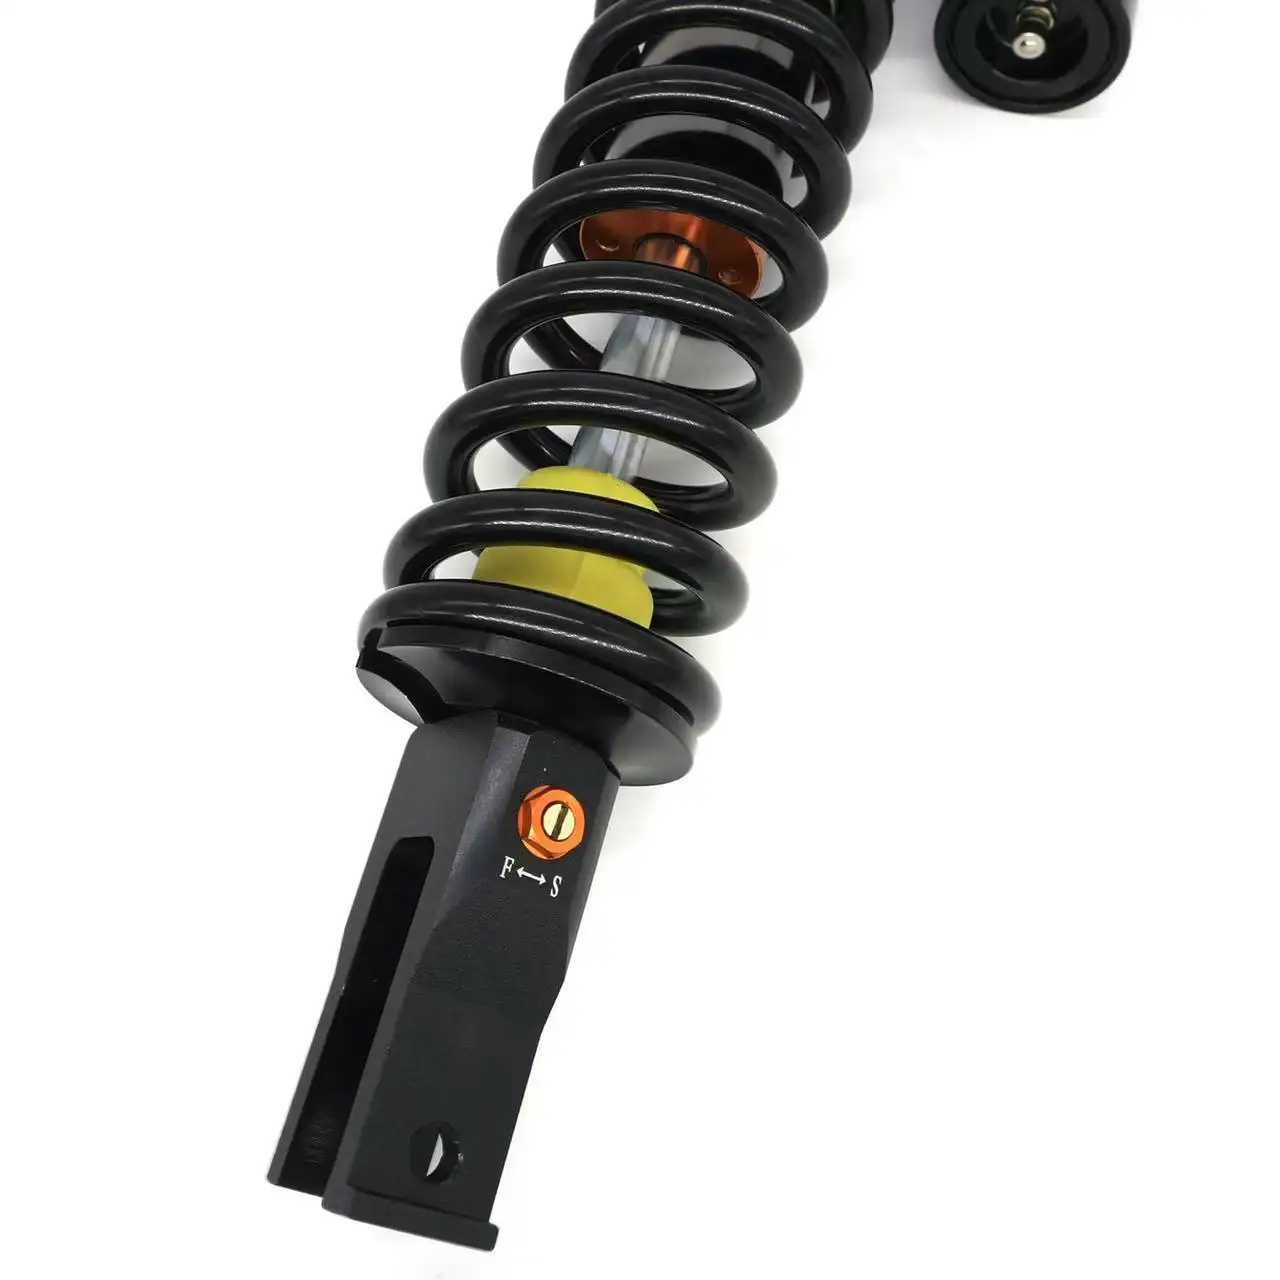 Fast Delivery In Stock High Quality Adjustable Rear Shock Absorber For Honda Motorcycle